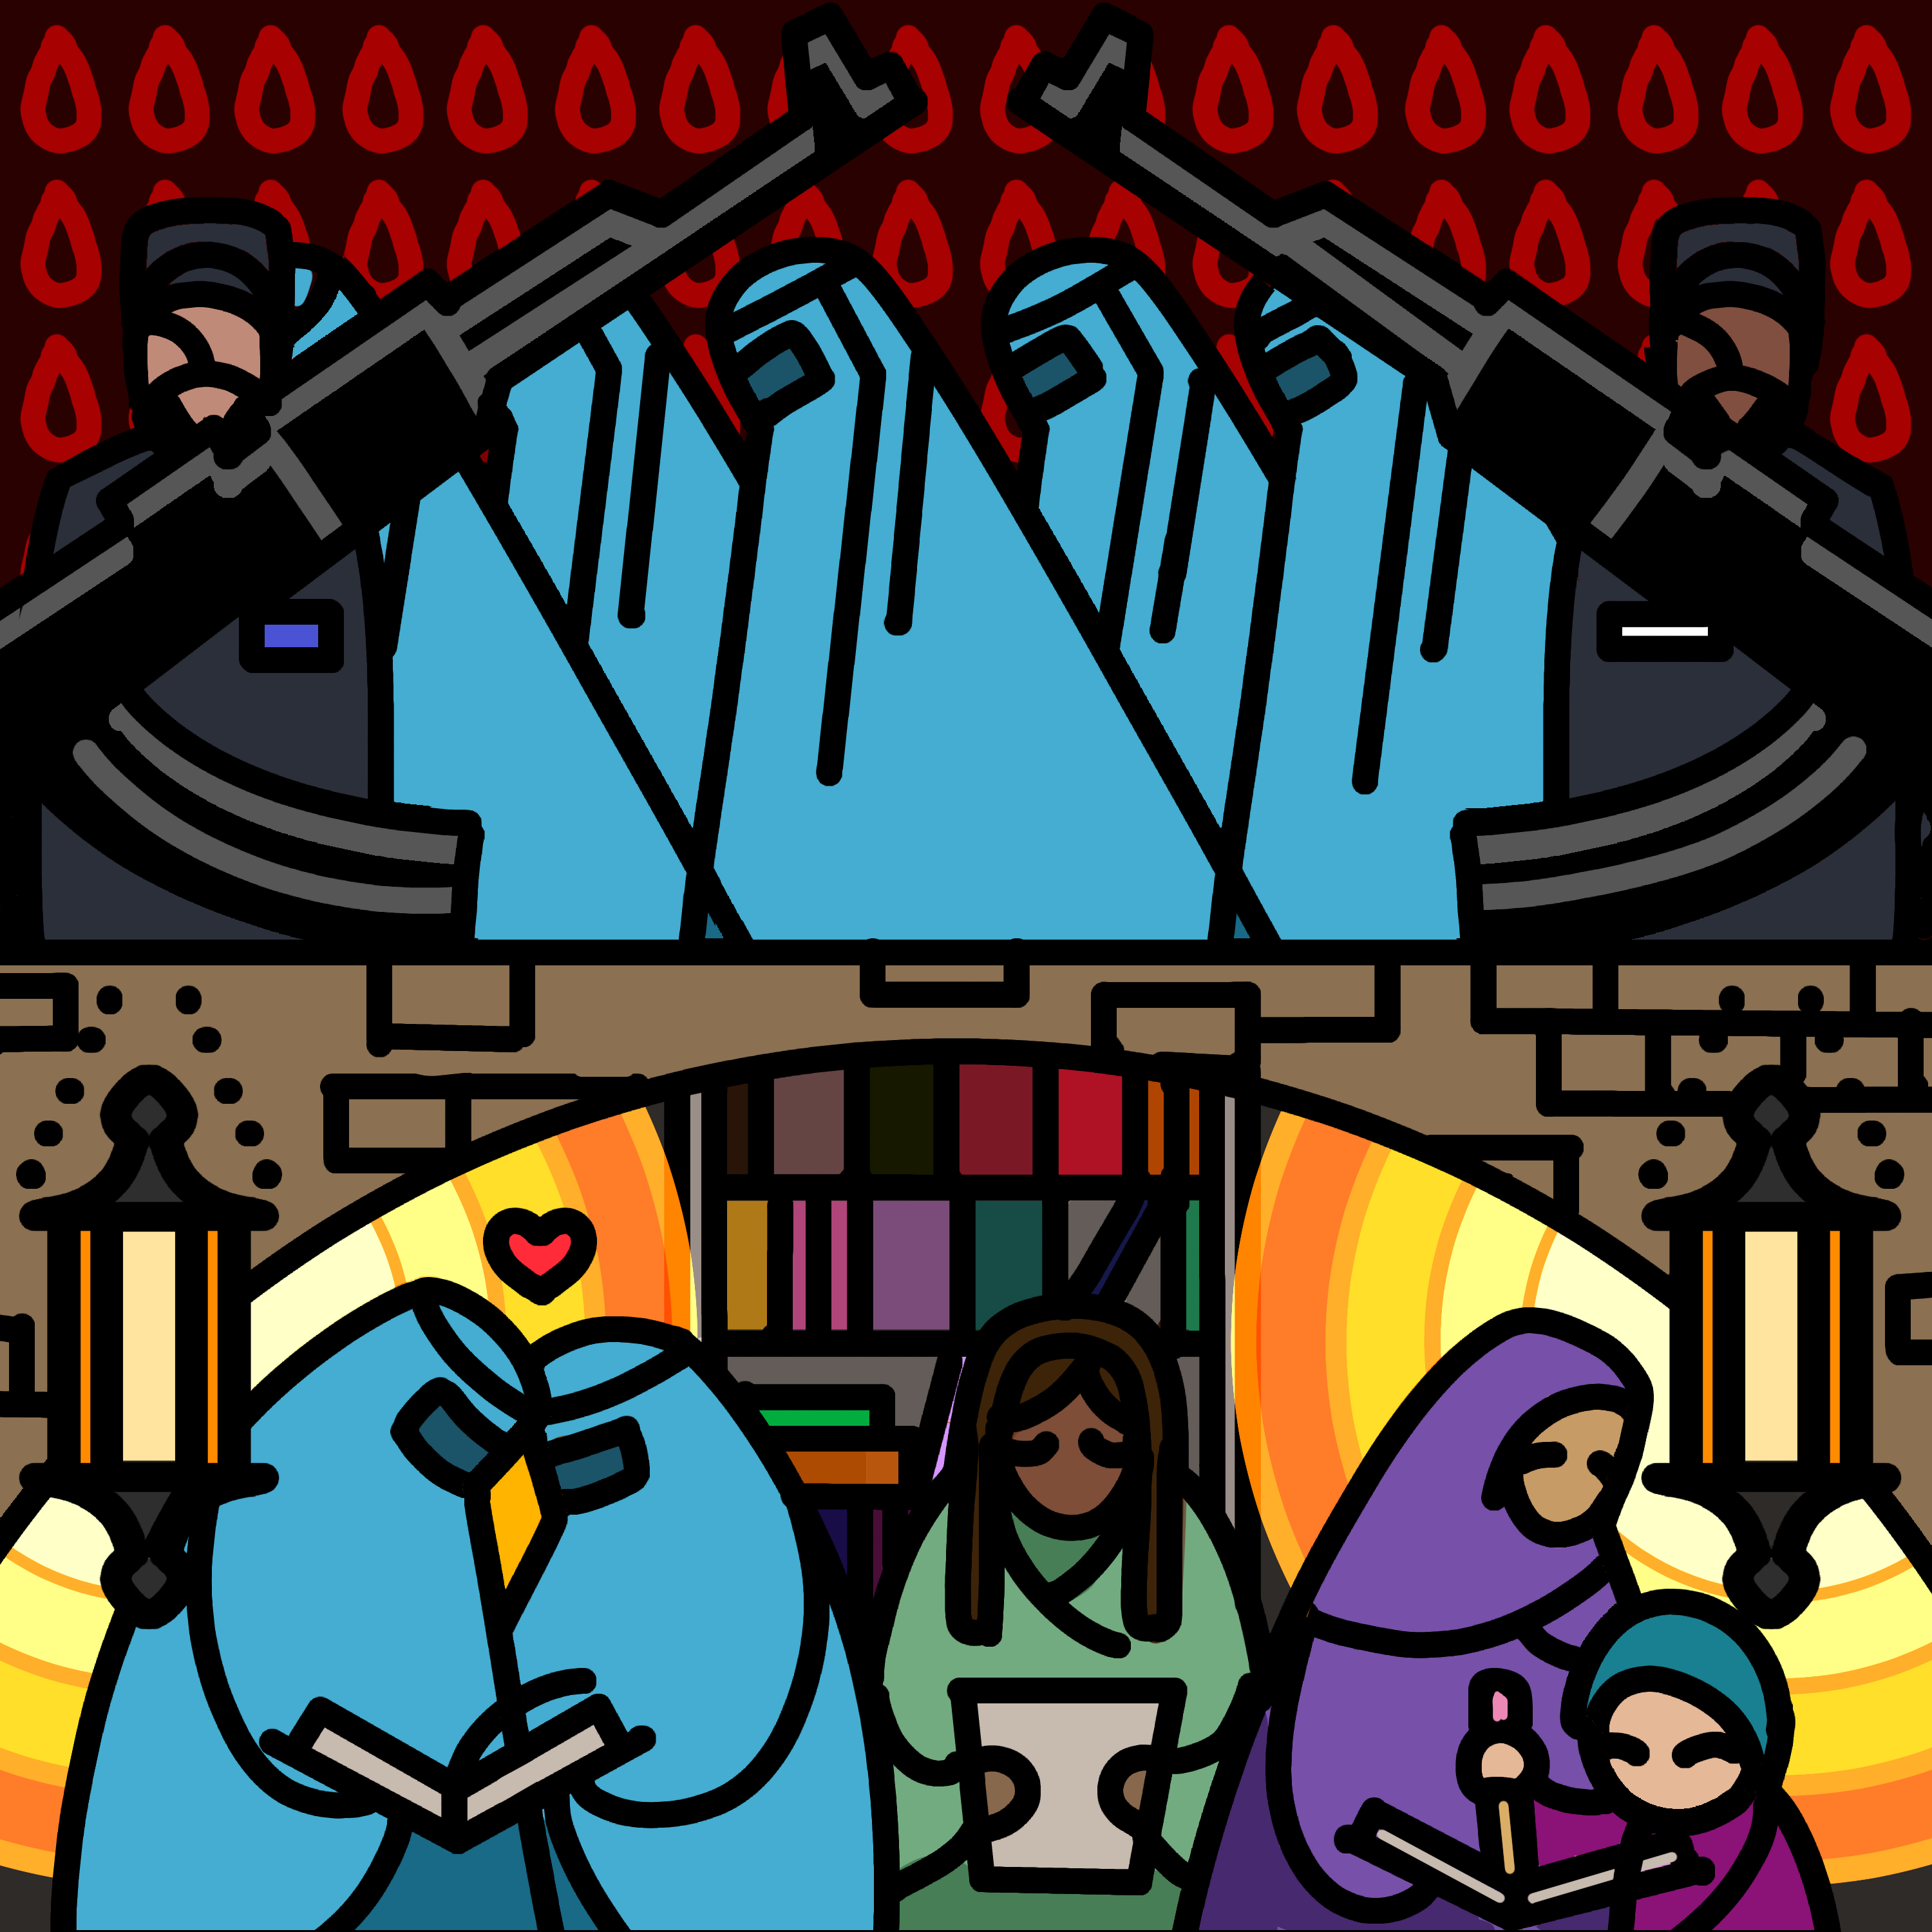 Illustration showing two scenes. The top shows women covered in blue burqas, their heads down, walking in a line. On either side are men in military uniforms. Two assault rifles are superimposed in the foreground, and red drops of blood form the background. The lower image shows women gathered underground in a warmly lit room with a book case. Some wear the burqas, but others wear less head coverings or have their hair showing. Two of the women are reading a book with a heart between them. One is reading a piece of paper. An adult woman is watching a young girl write in a book. The lower image has a feeling of warmth and camaraderie, contrasted with the frightening control of the top image.